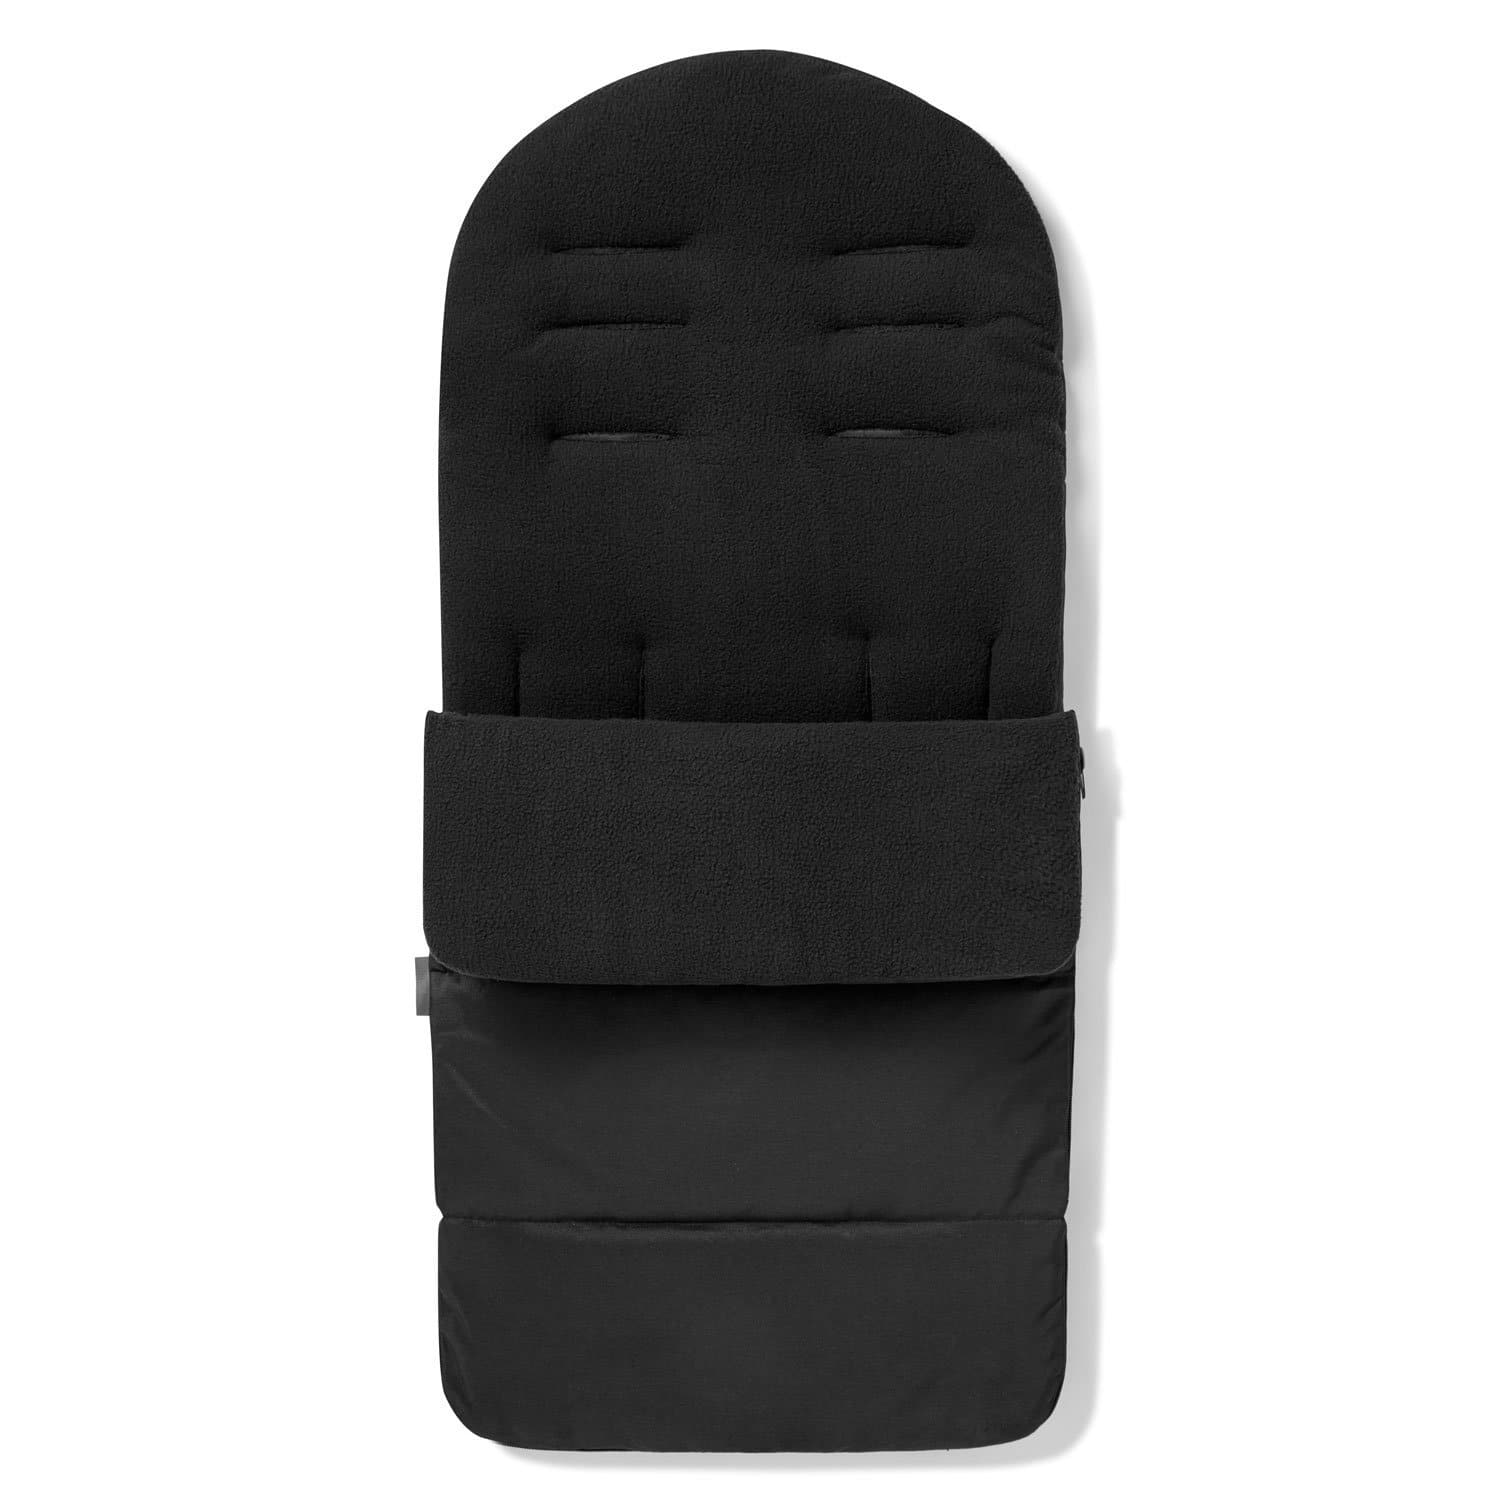 Premium Footmuff / Cosy Toes Compatible with Phil & Teds - Black Jack / Fits All Models | For Your Little One